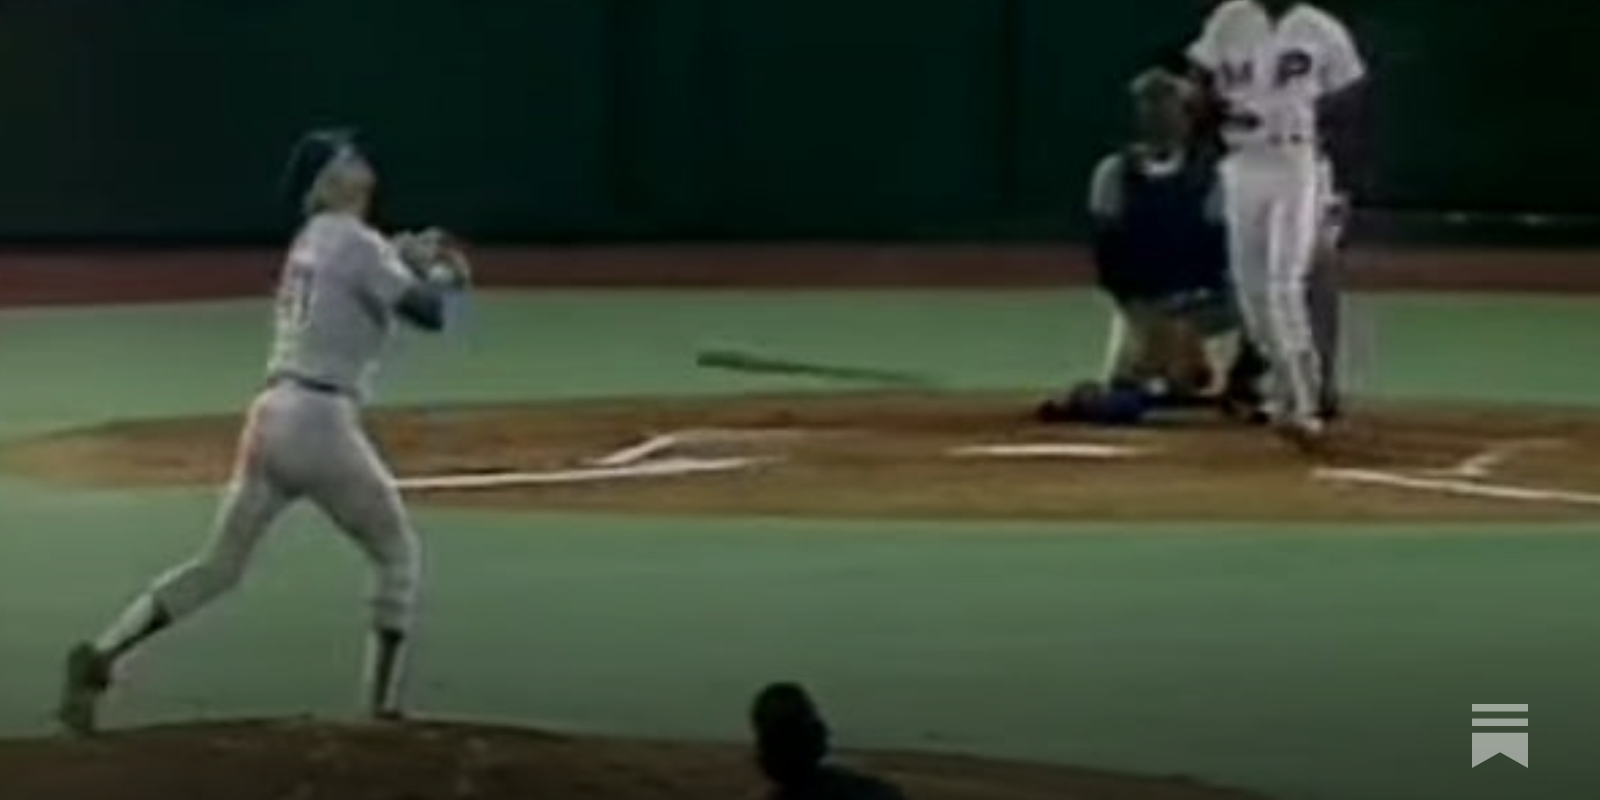 Tom Lawless: Game 4, 1987 World Series